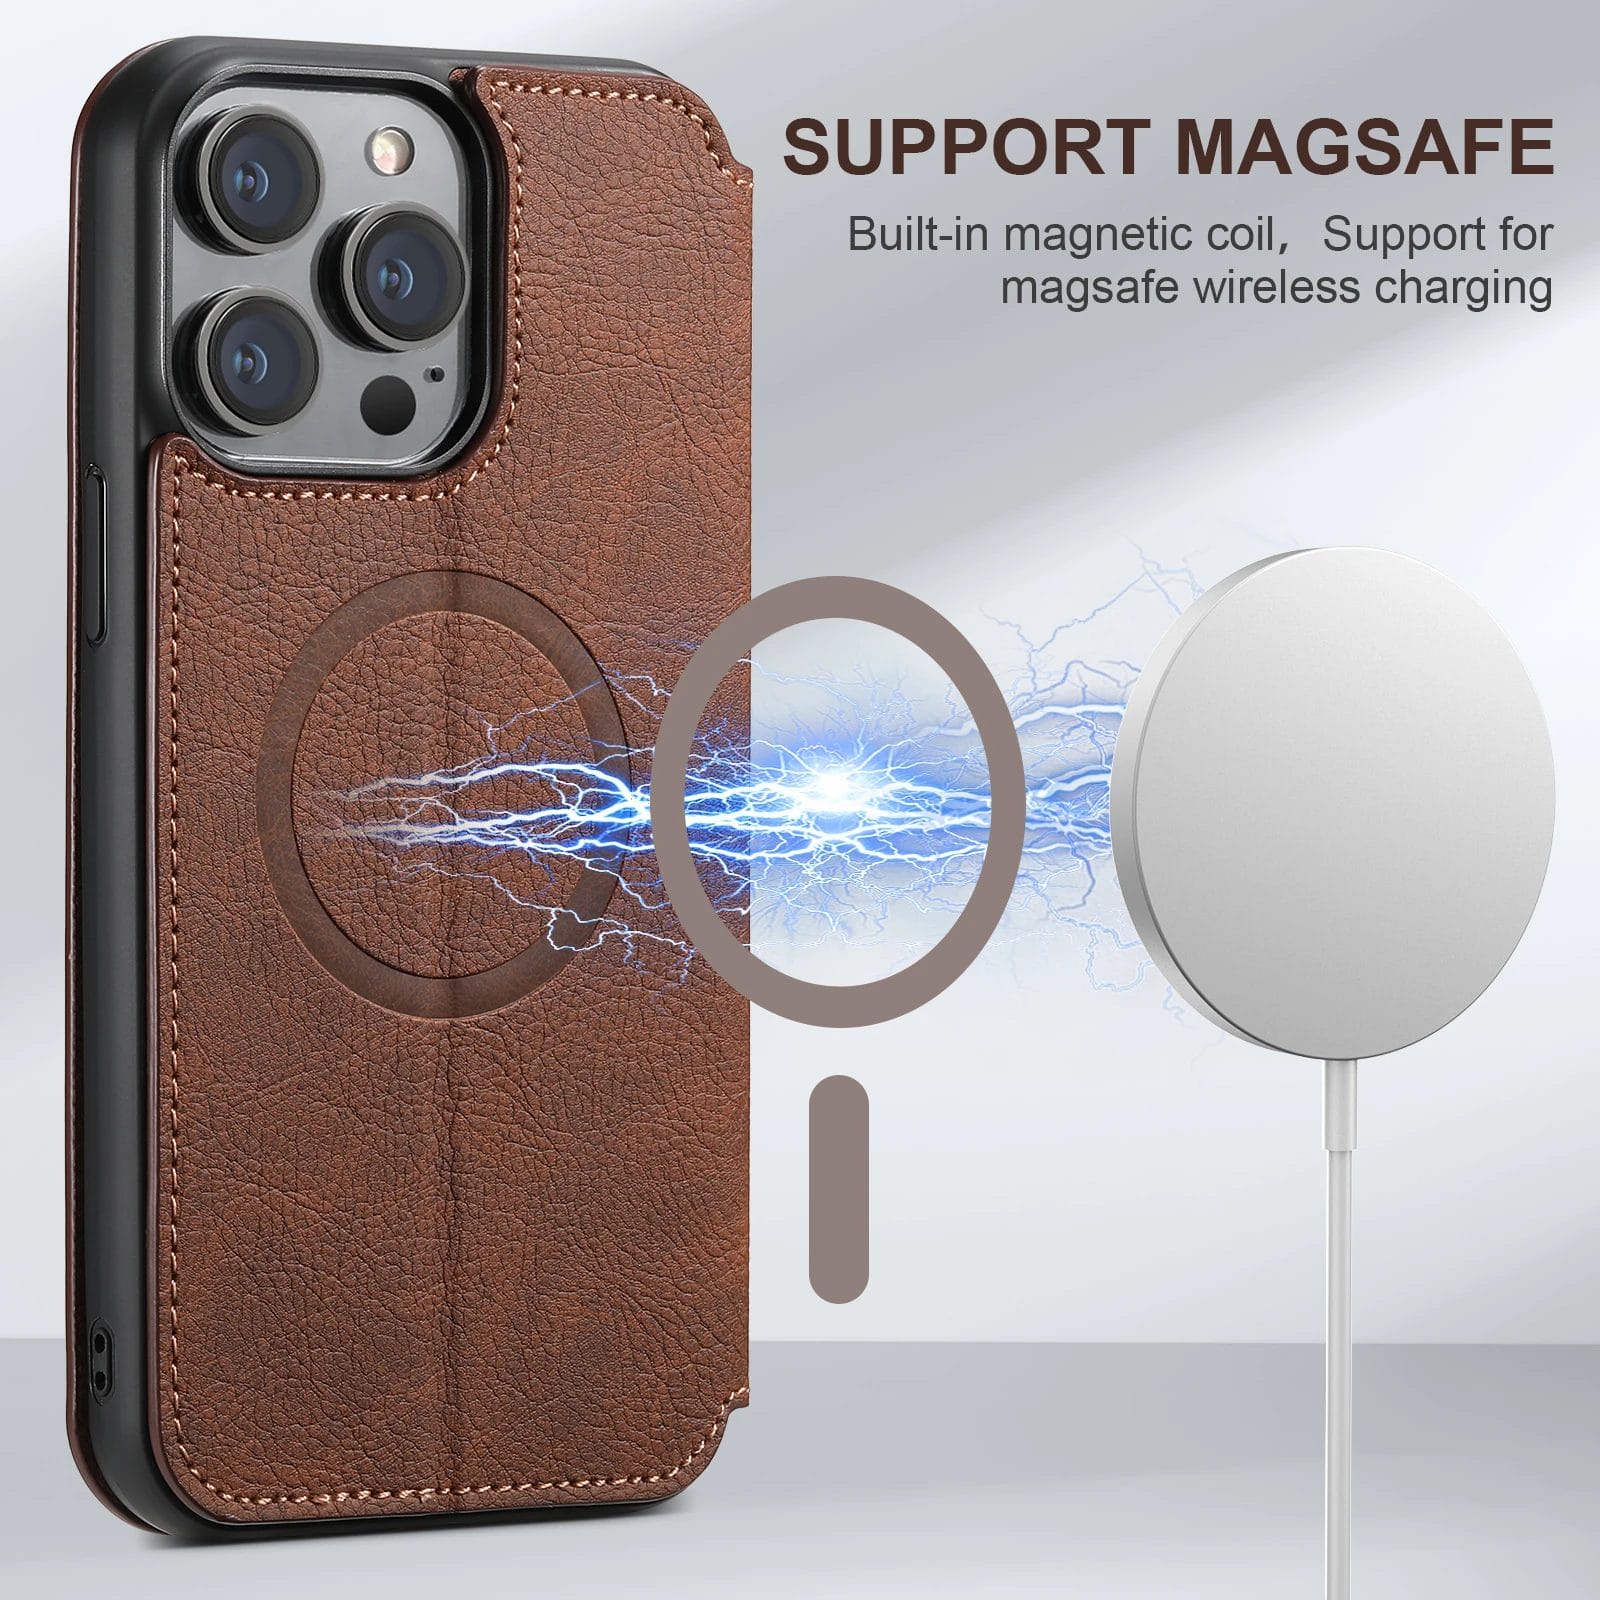 Magsafe Luxury Leather Wallet Flip Phone Case For iPhone TAC- 3 2